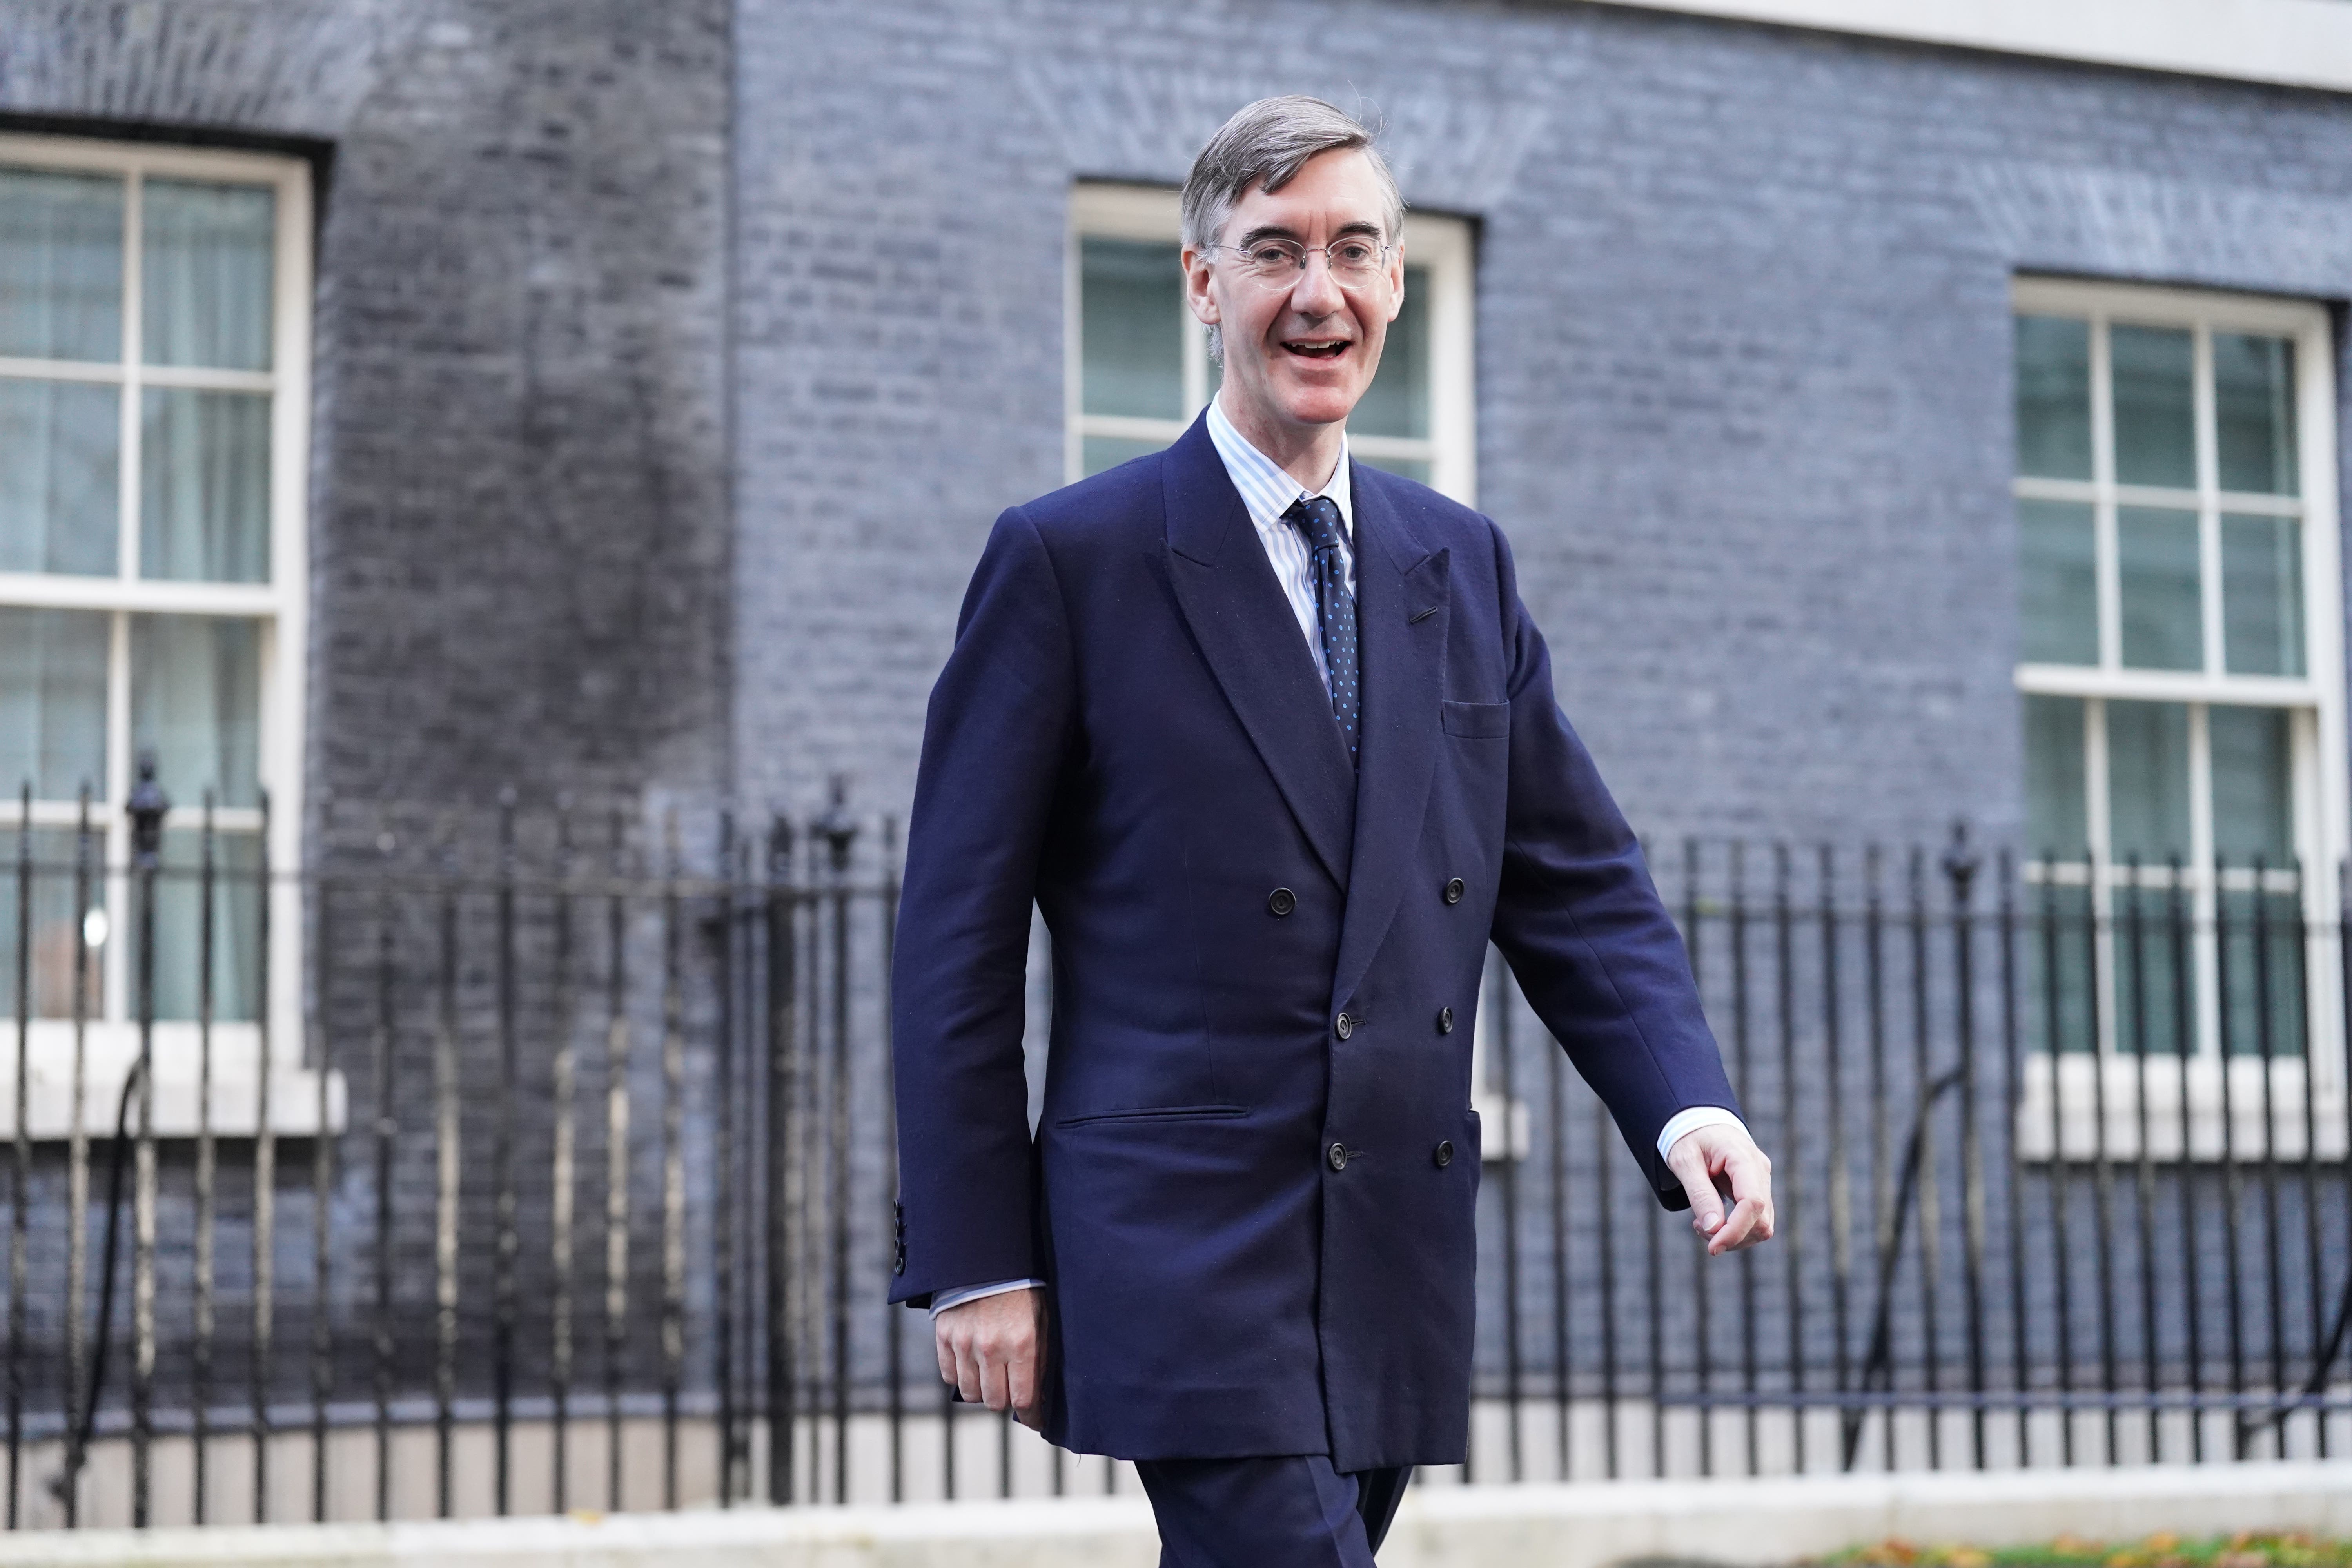 Sir Jacob Rees-Mogg said the party had to get behind the leader (Stefan Rousseau/PA)